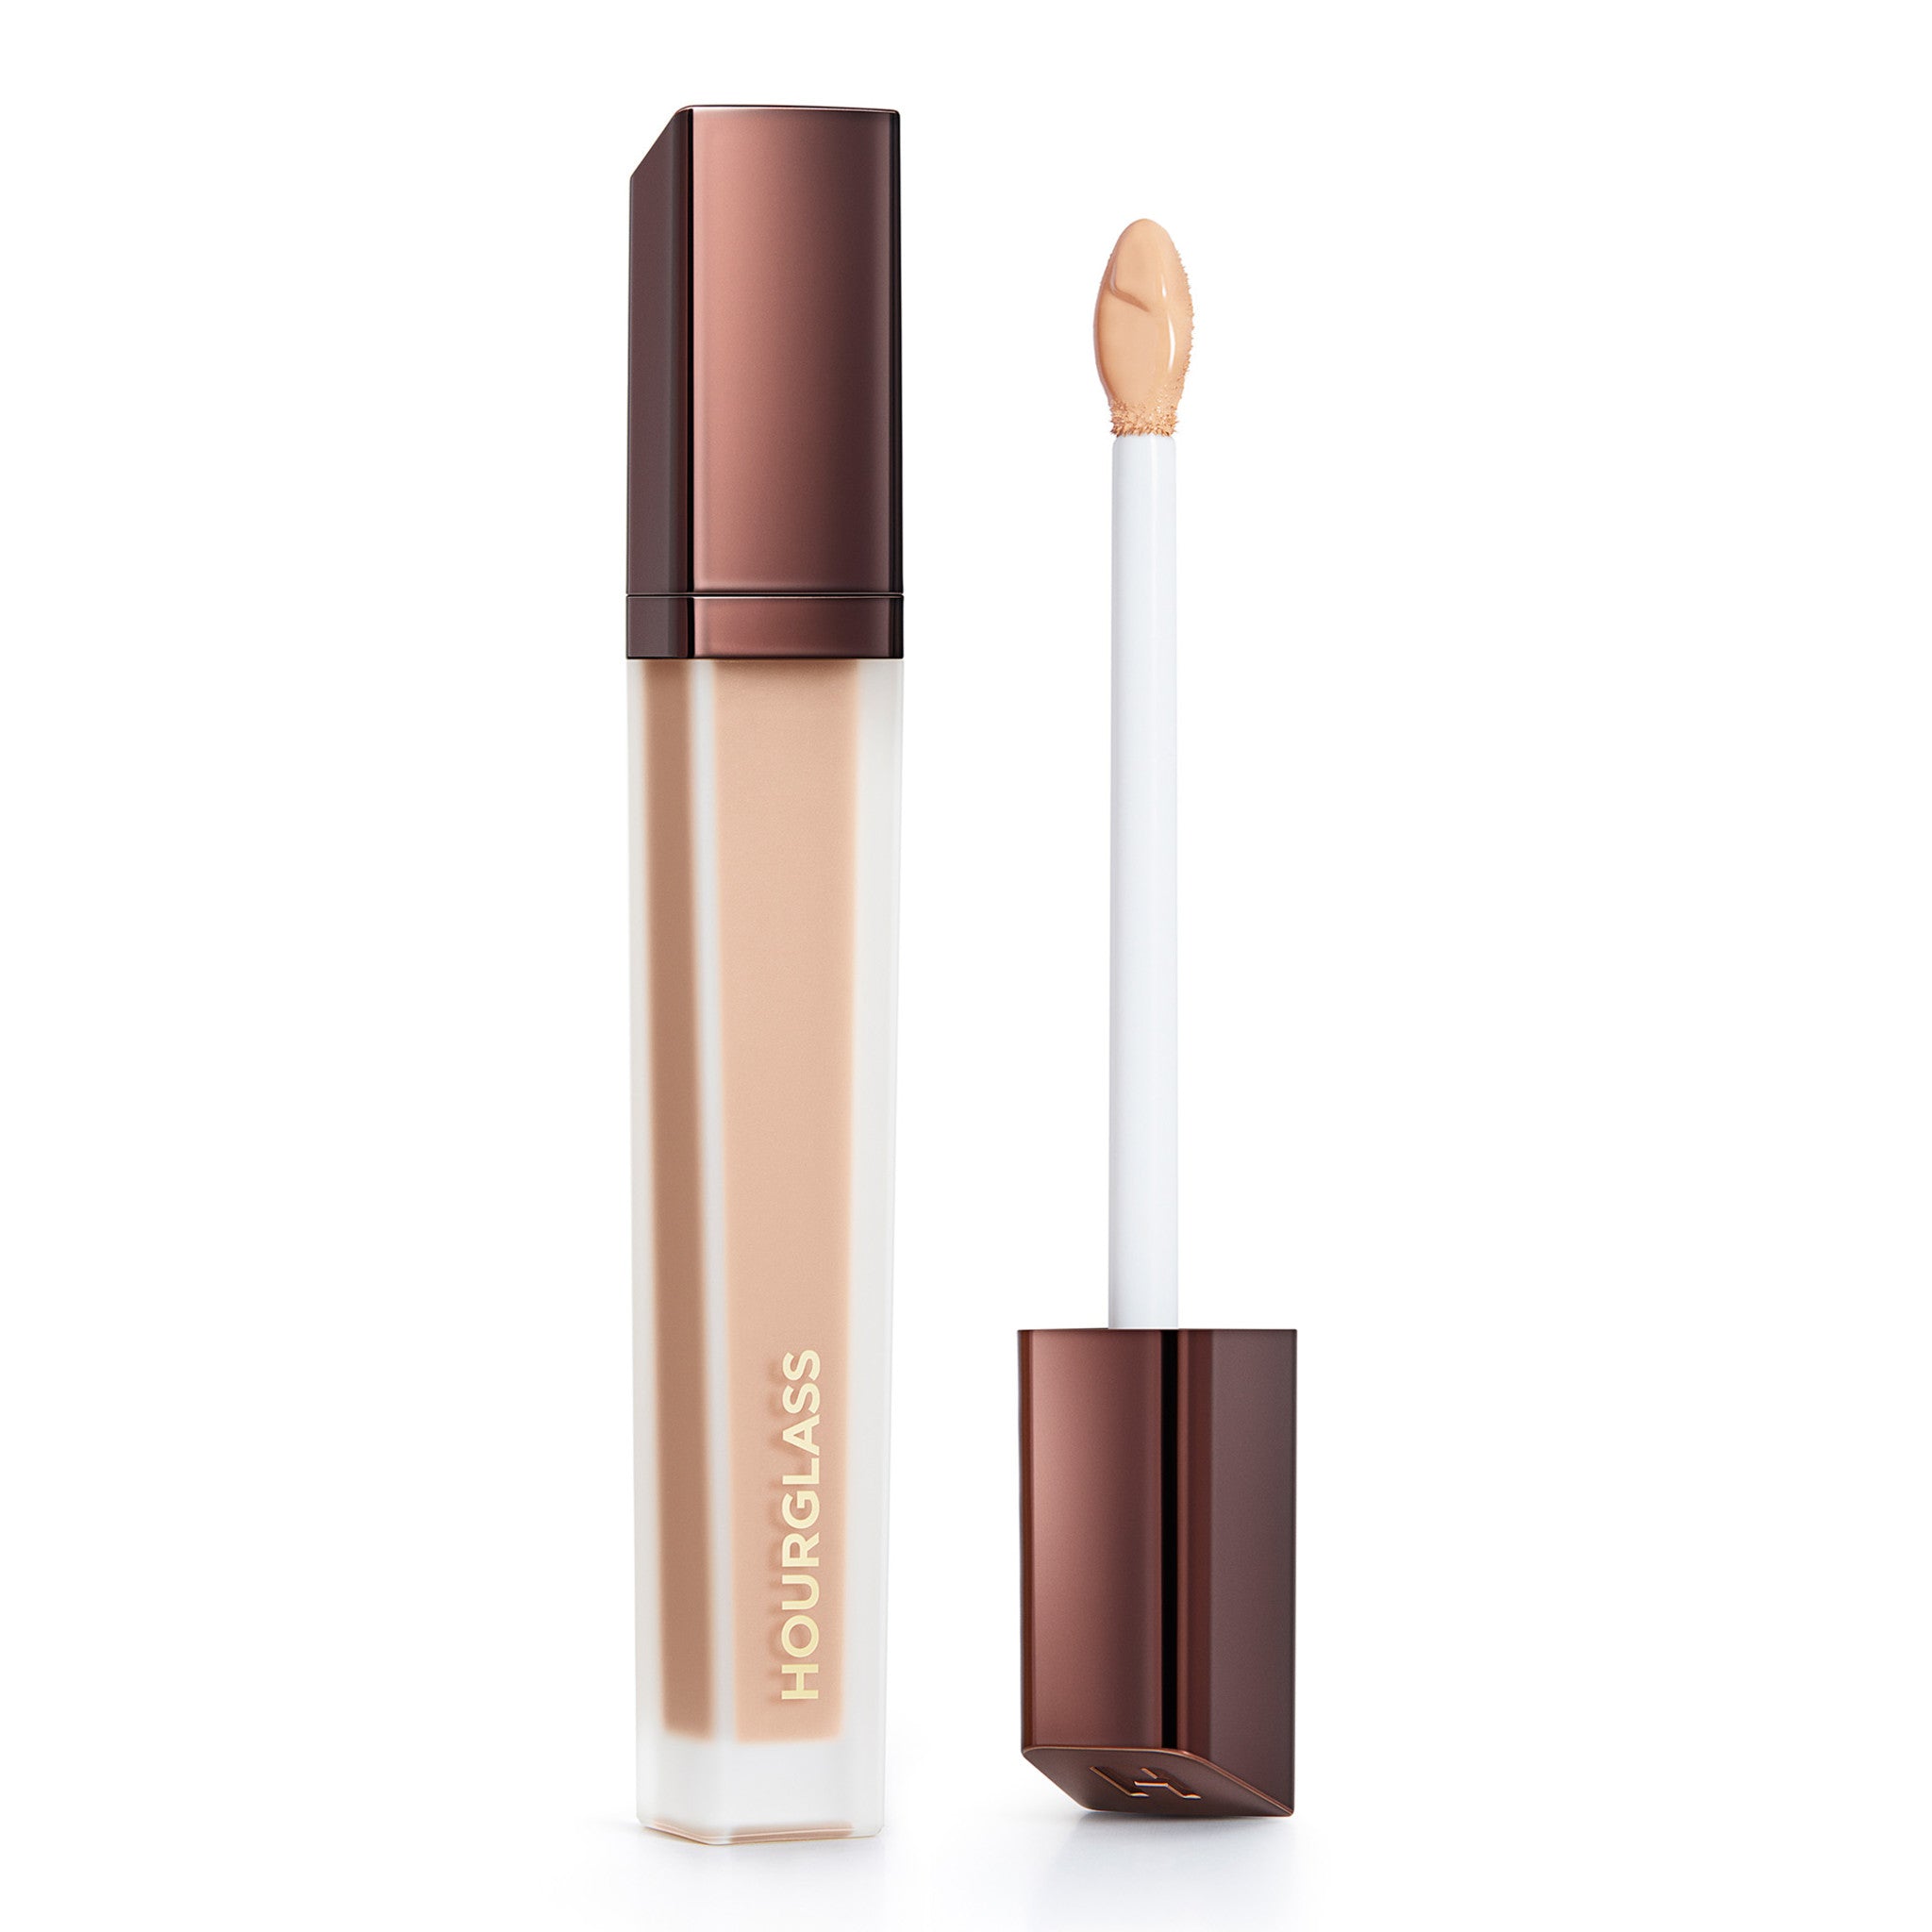 Face Concealers main image.